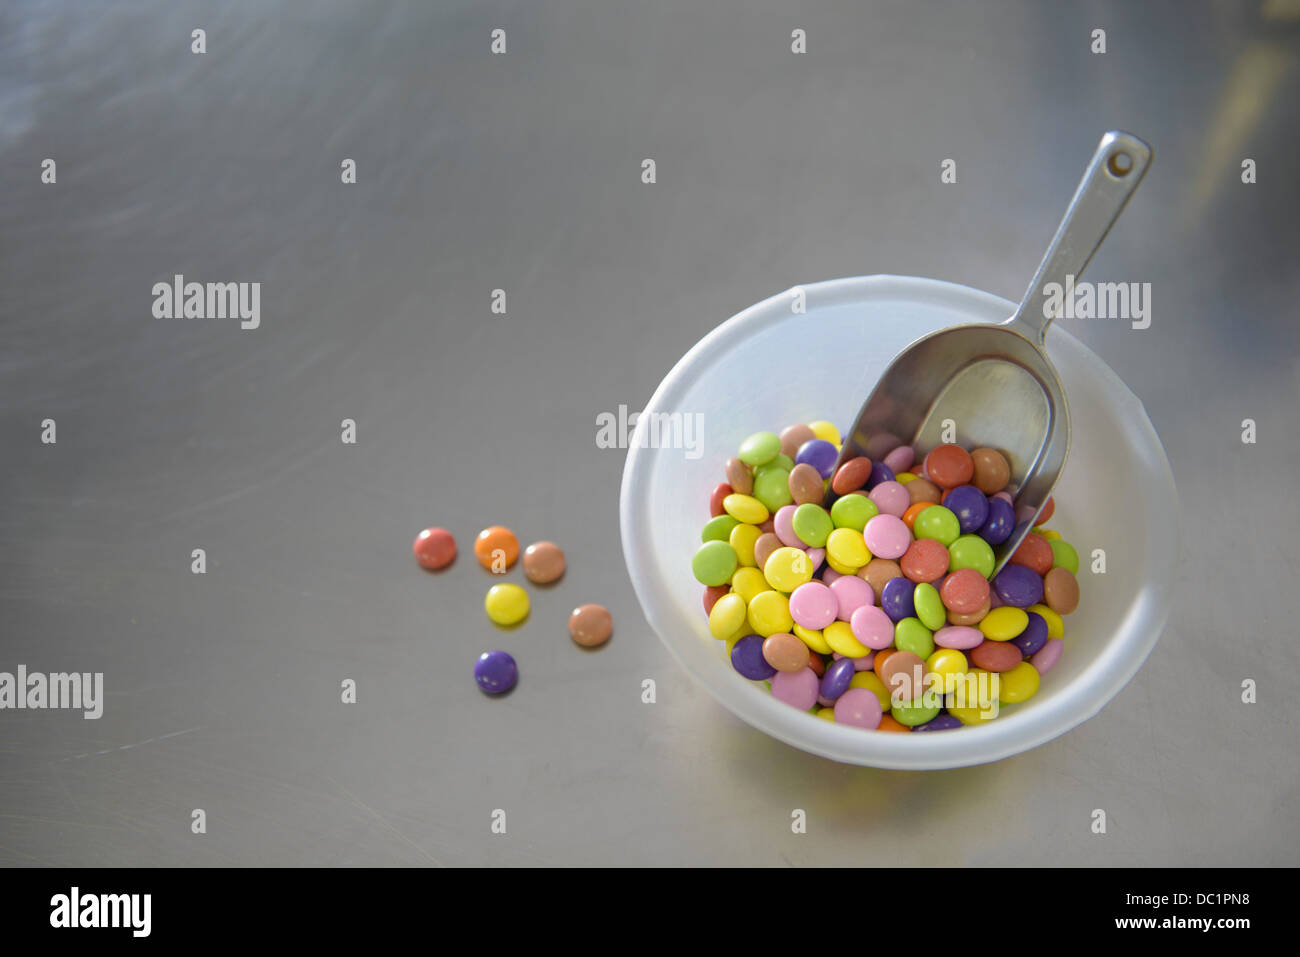 Still life bowl of multi colored sweets Stock Photo